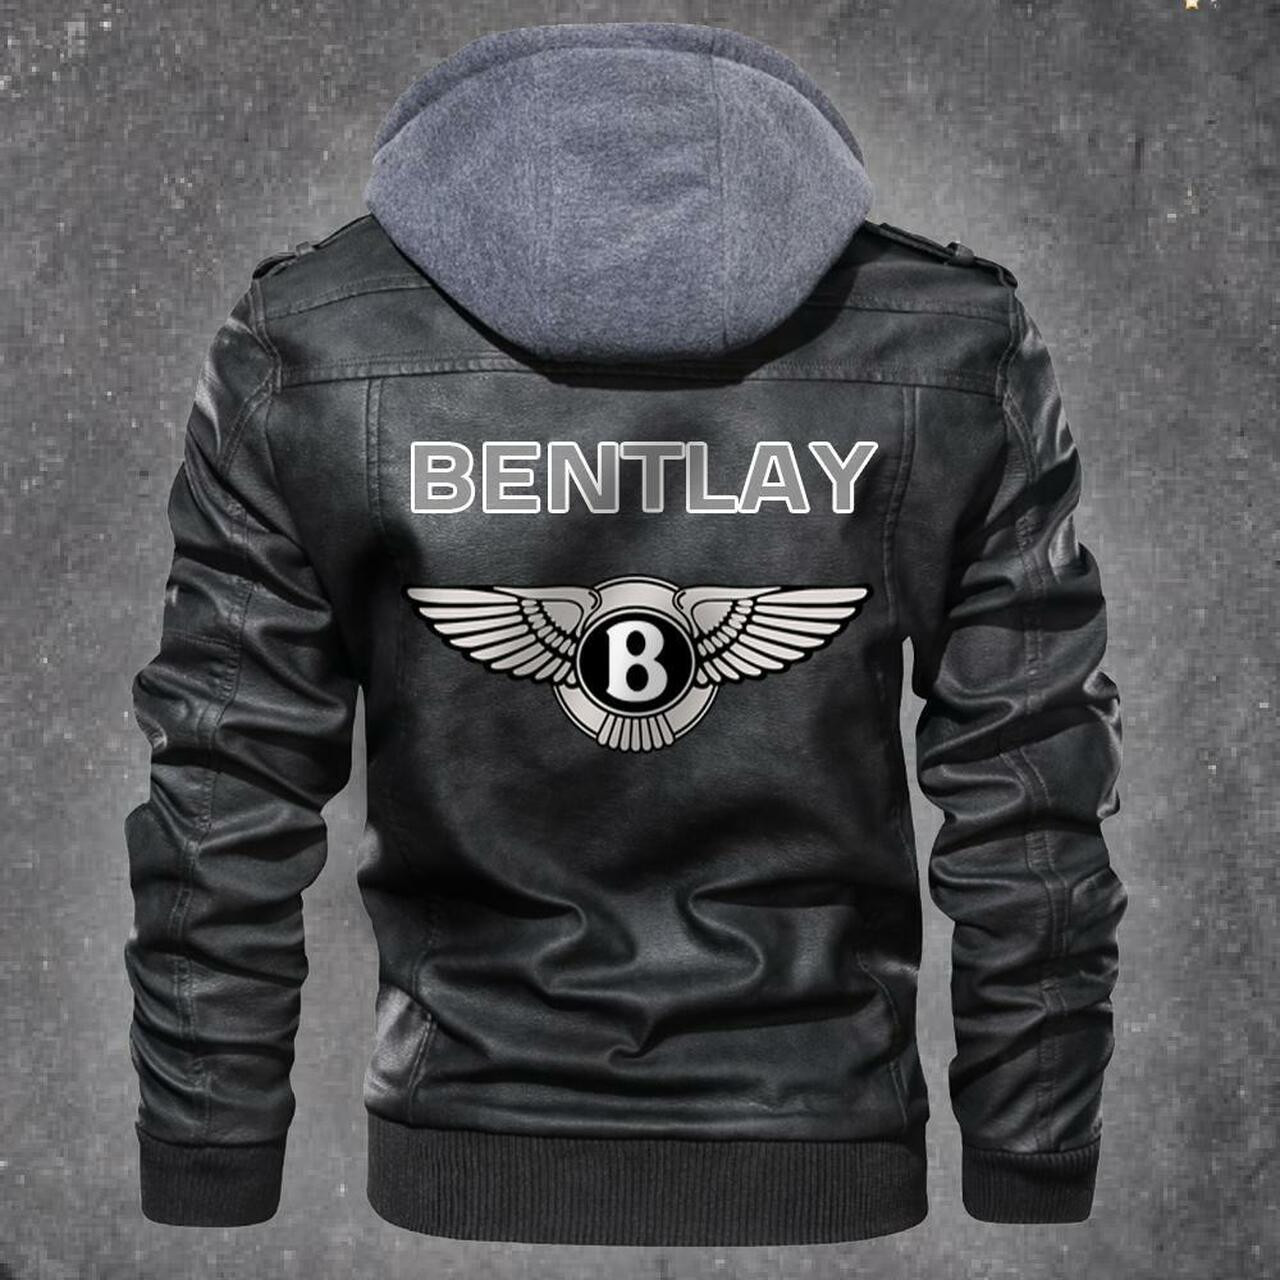 You'll have the perfect jacket in no time by clicking the link below 431